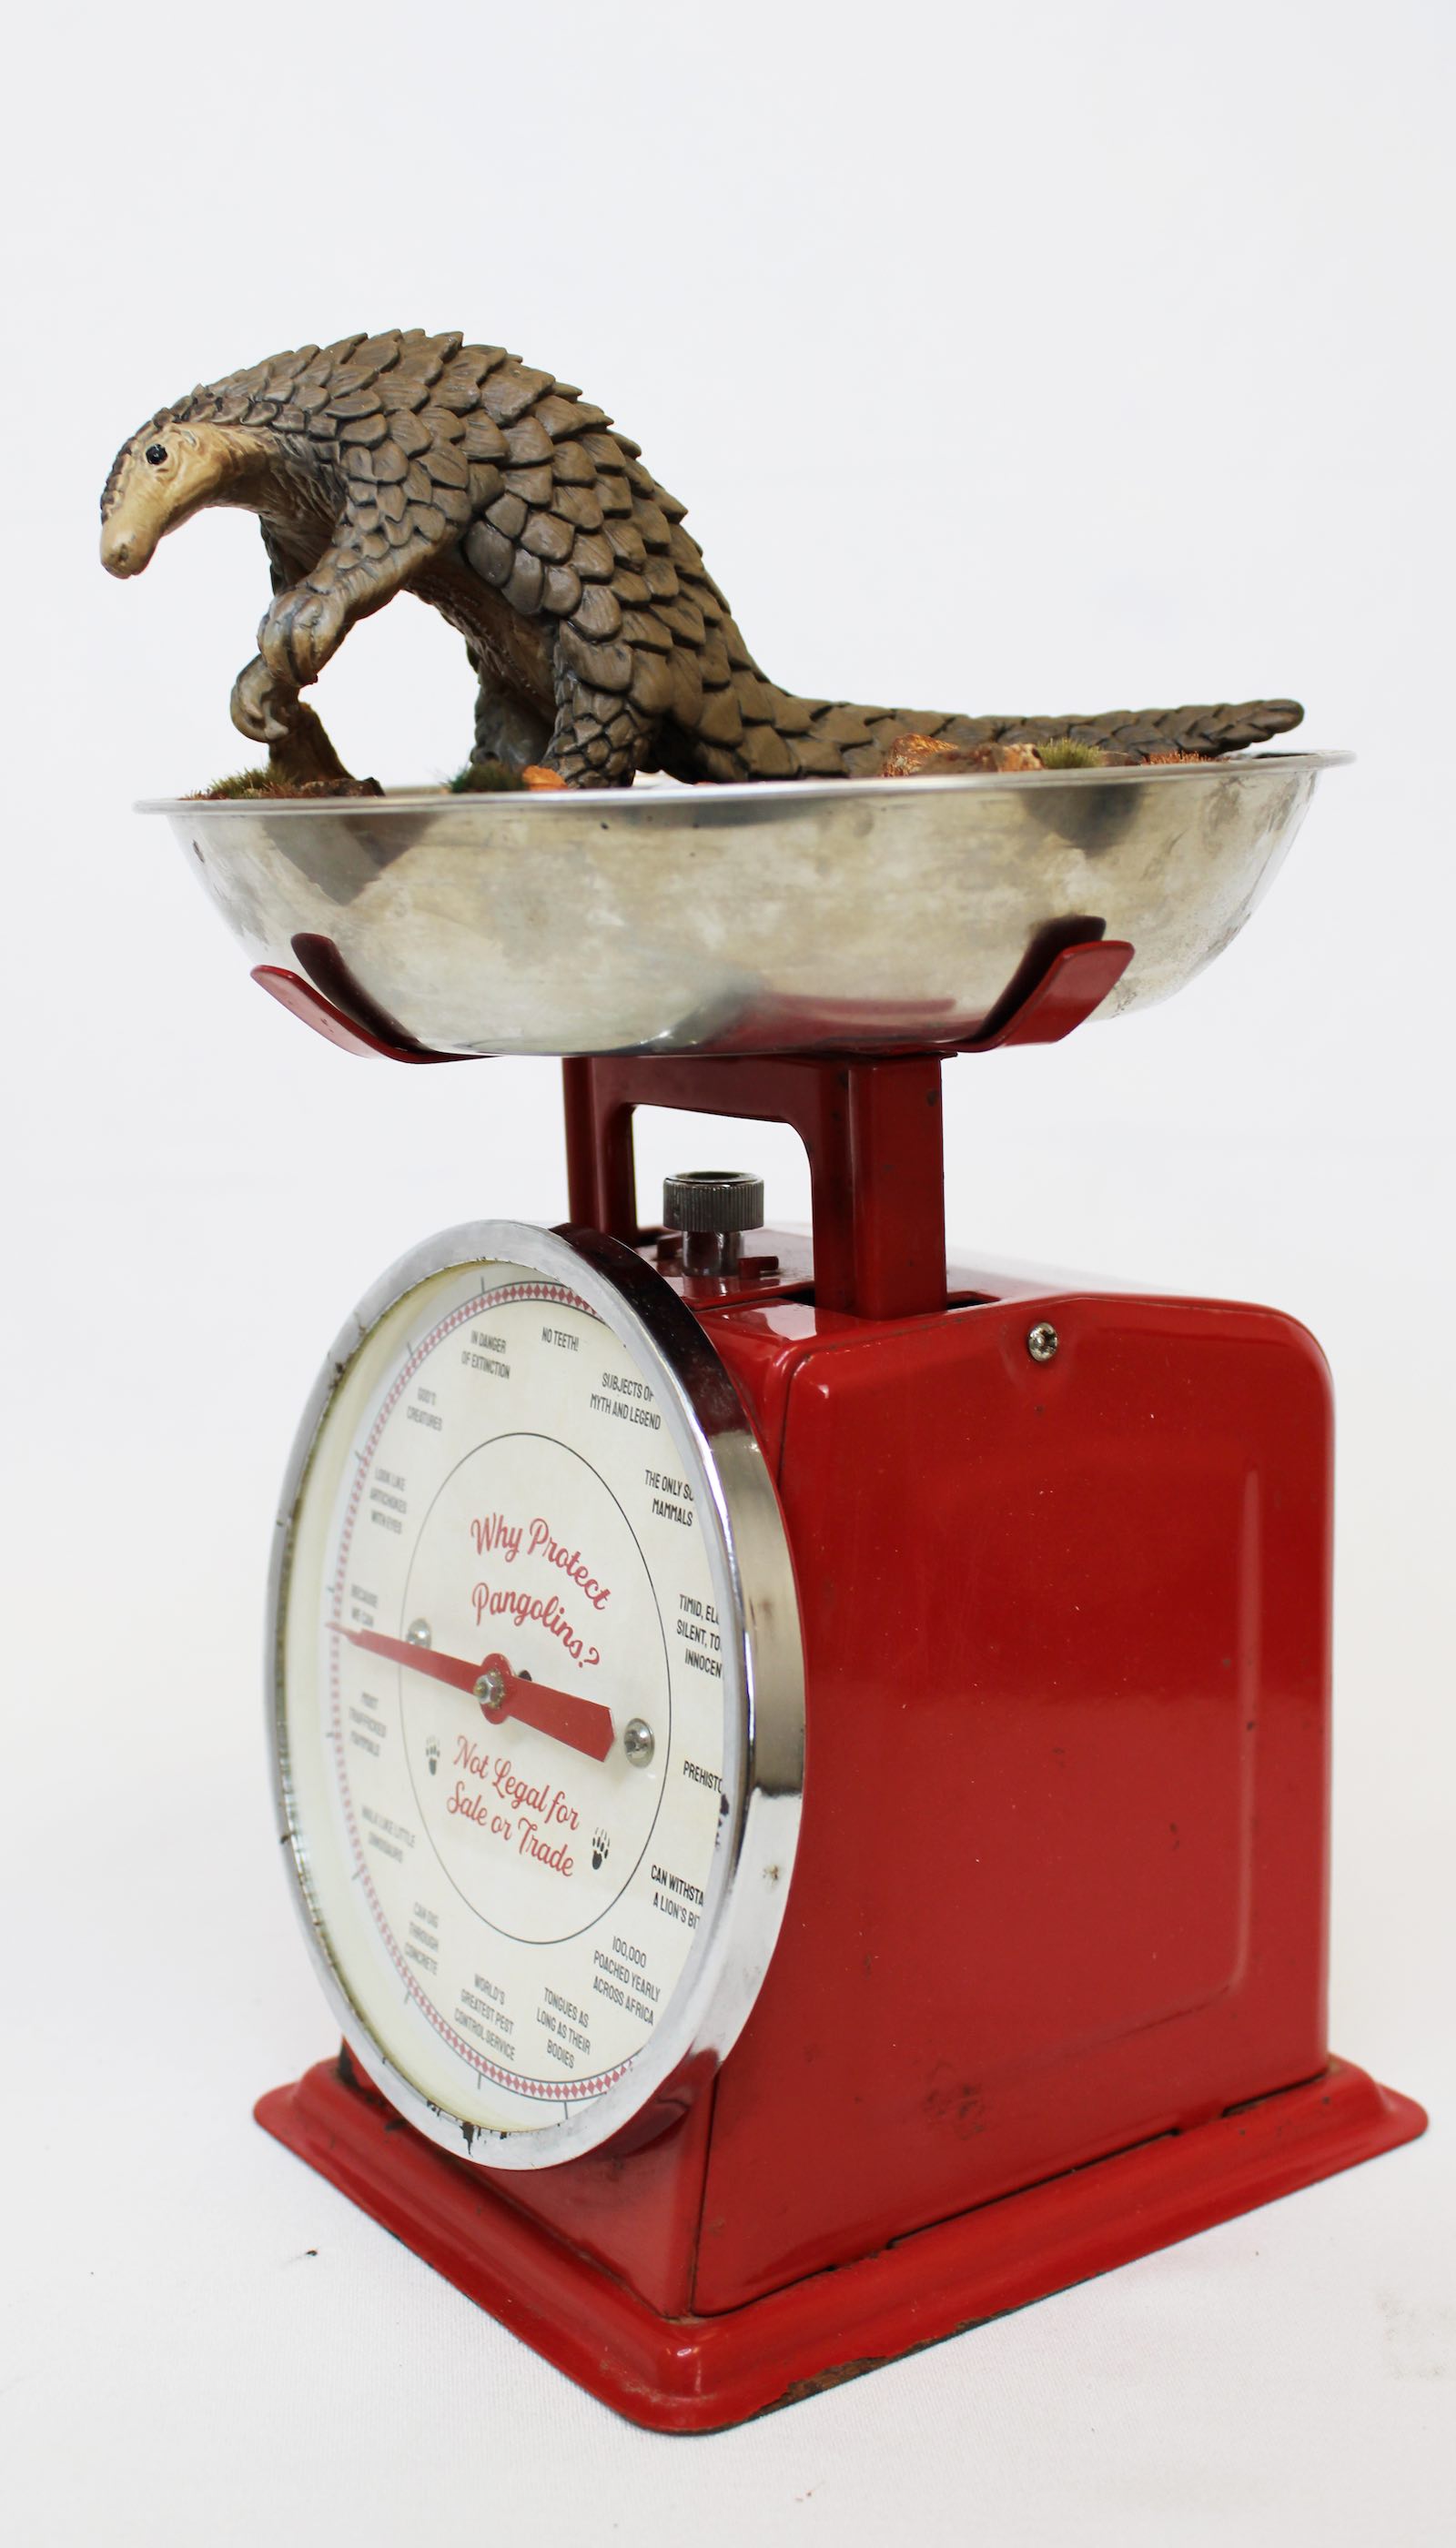 Sculpture of a pangolin on a set of weighing scales.